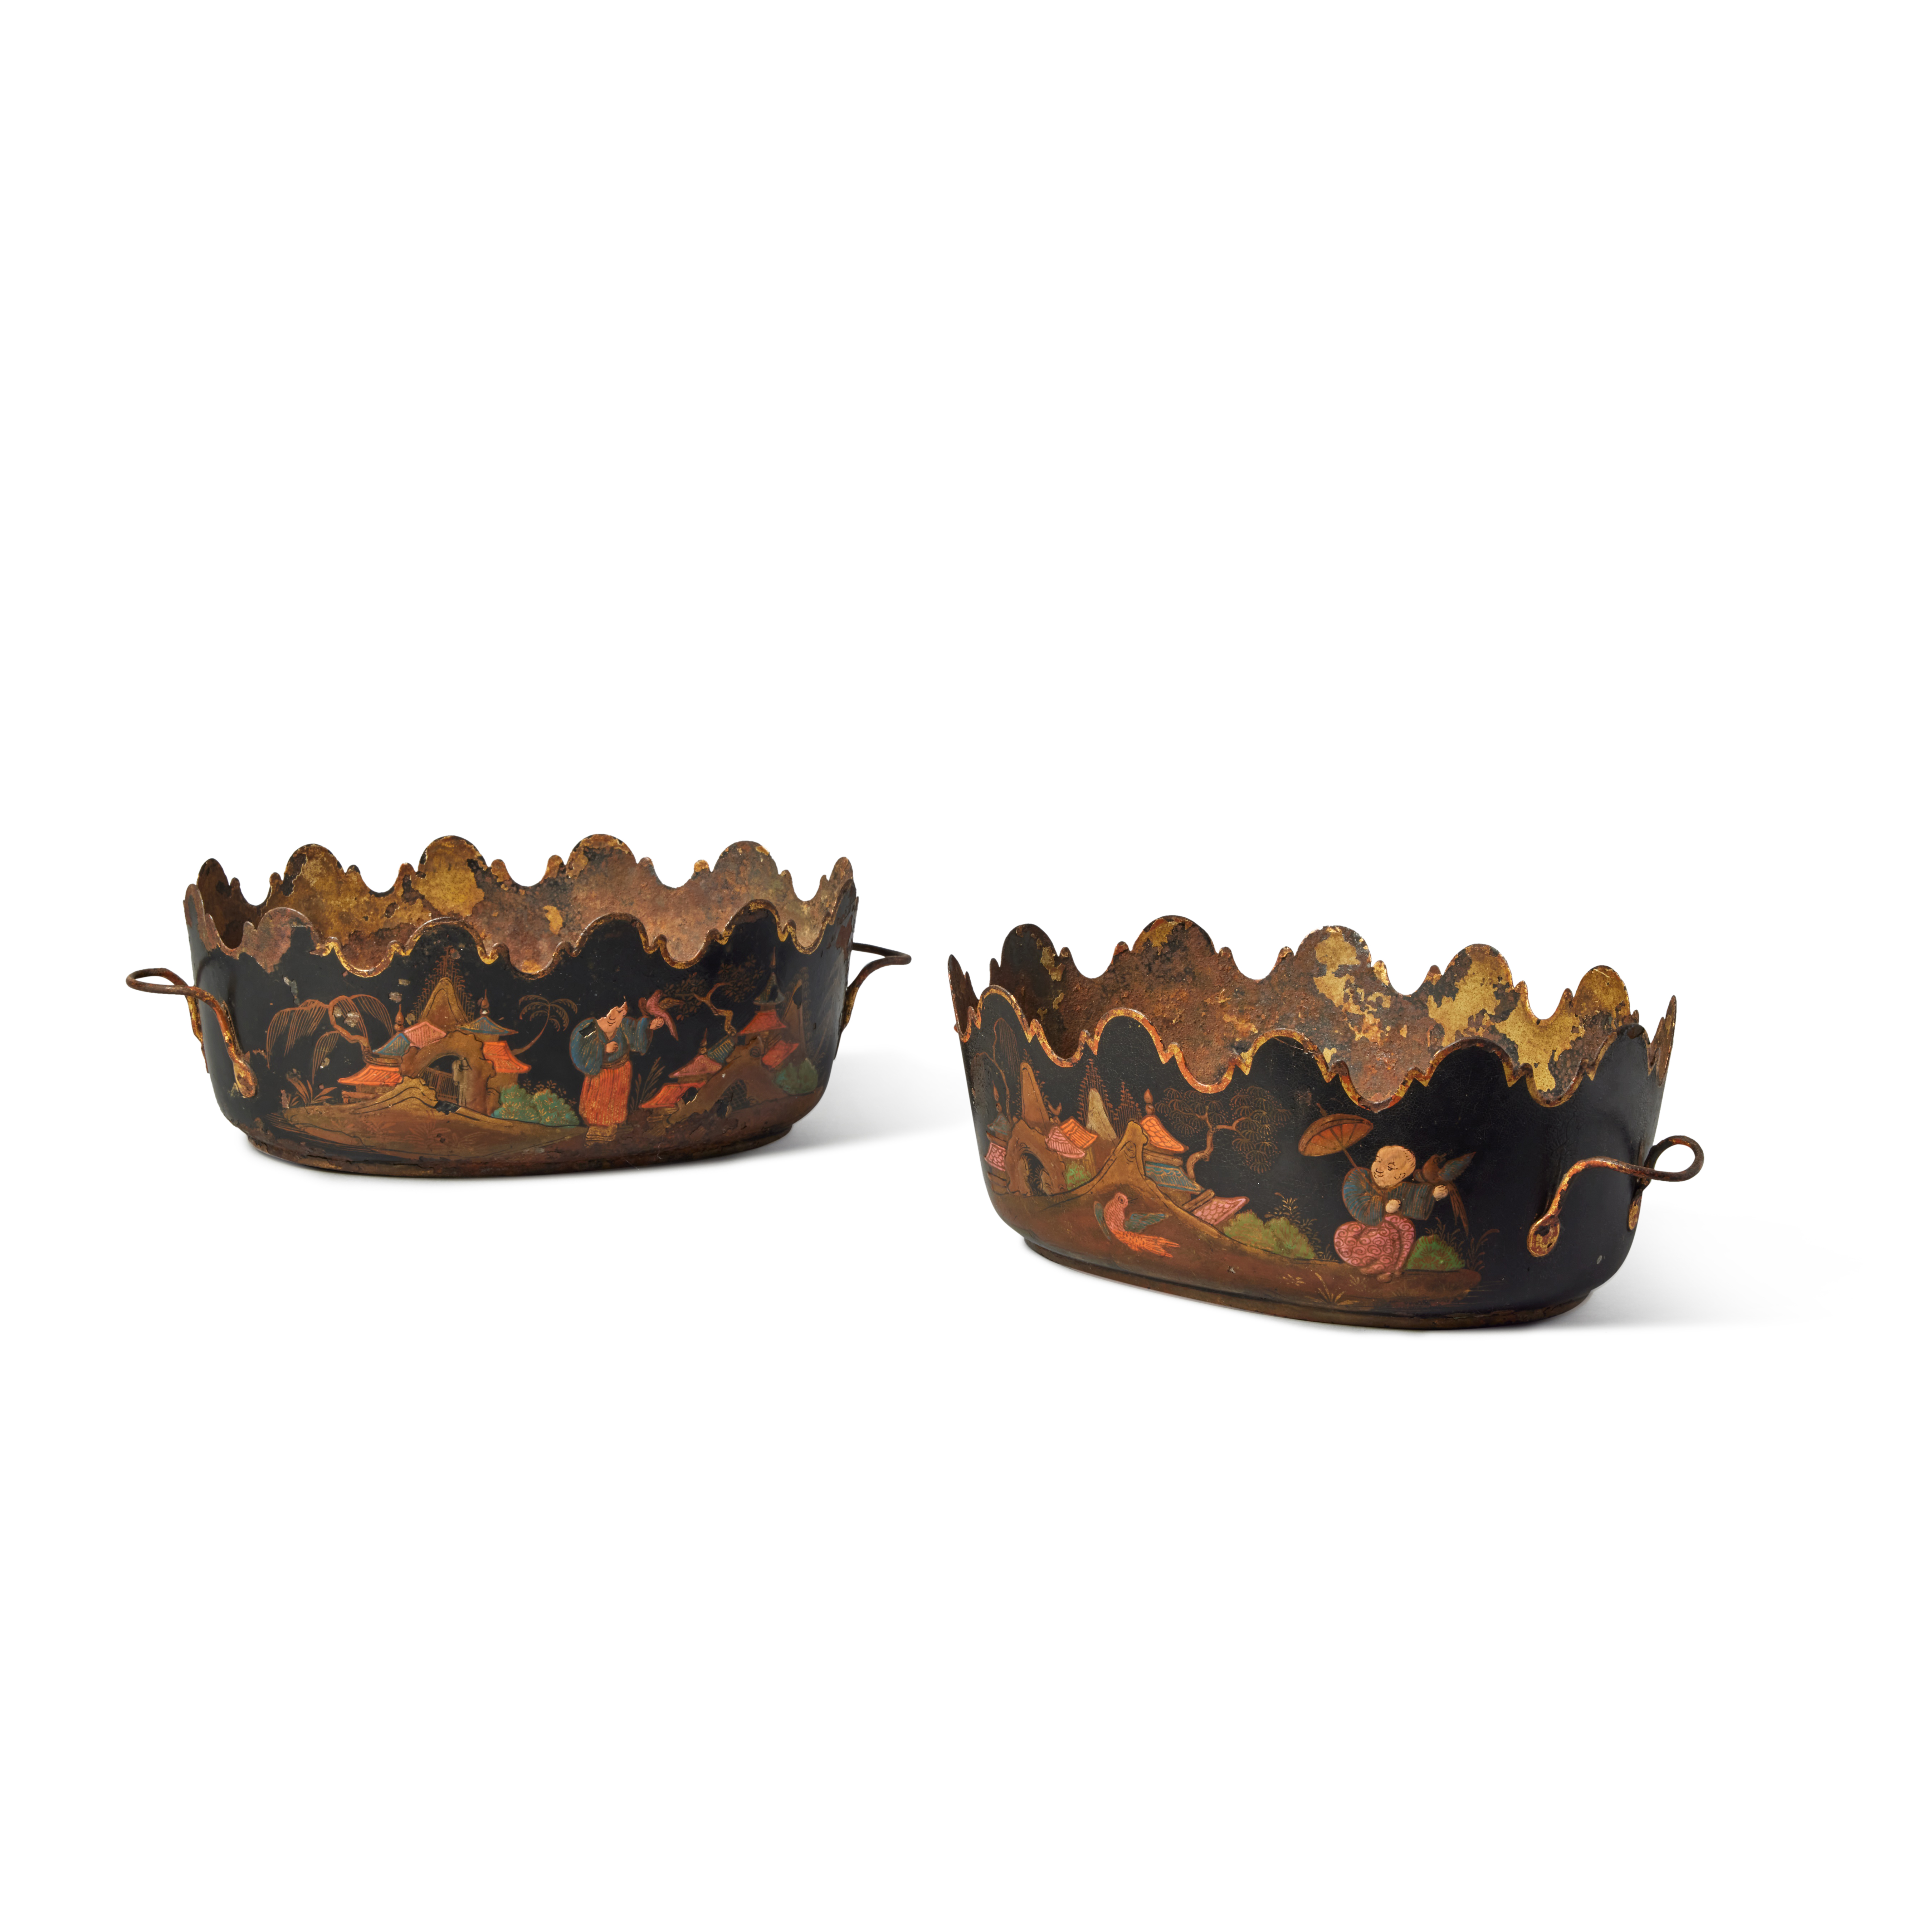 A Pair of Louis XVI Tôle-Peinte Two-Handled Verrieres, 18th/19th Century - Image 2 of 3